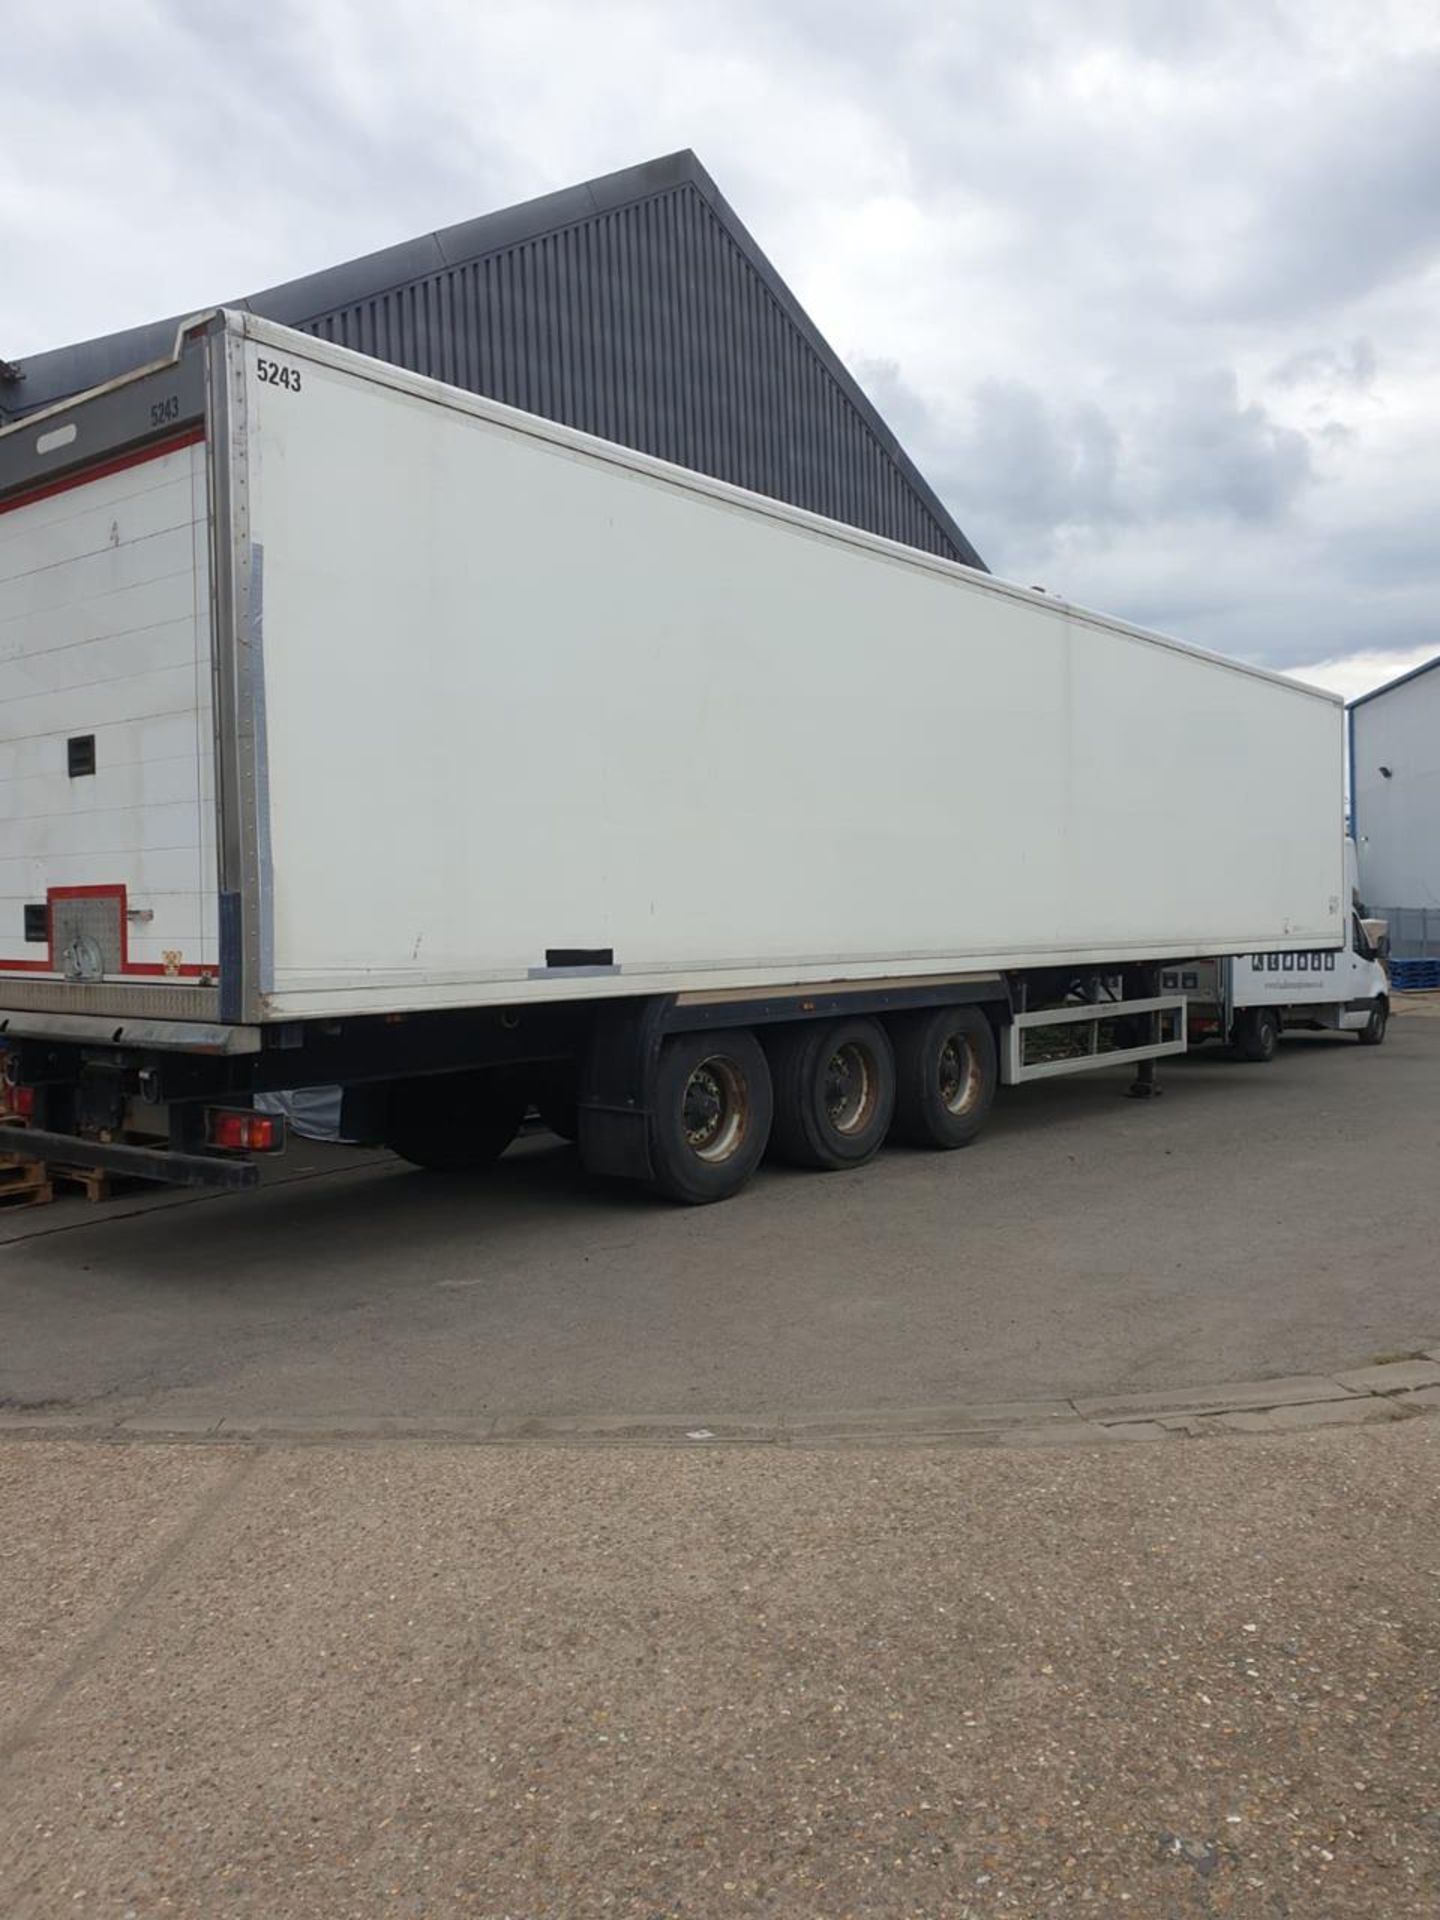 + VAT 2013 Montracon 13.6m Tri-Axle Insulated Box Trailer - Roller Shutter At Rear - 4.065m Overall - Image 3 of 4